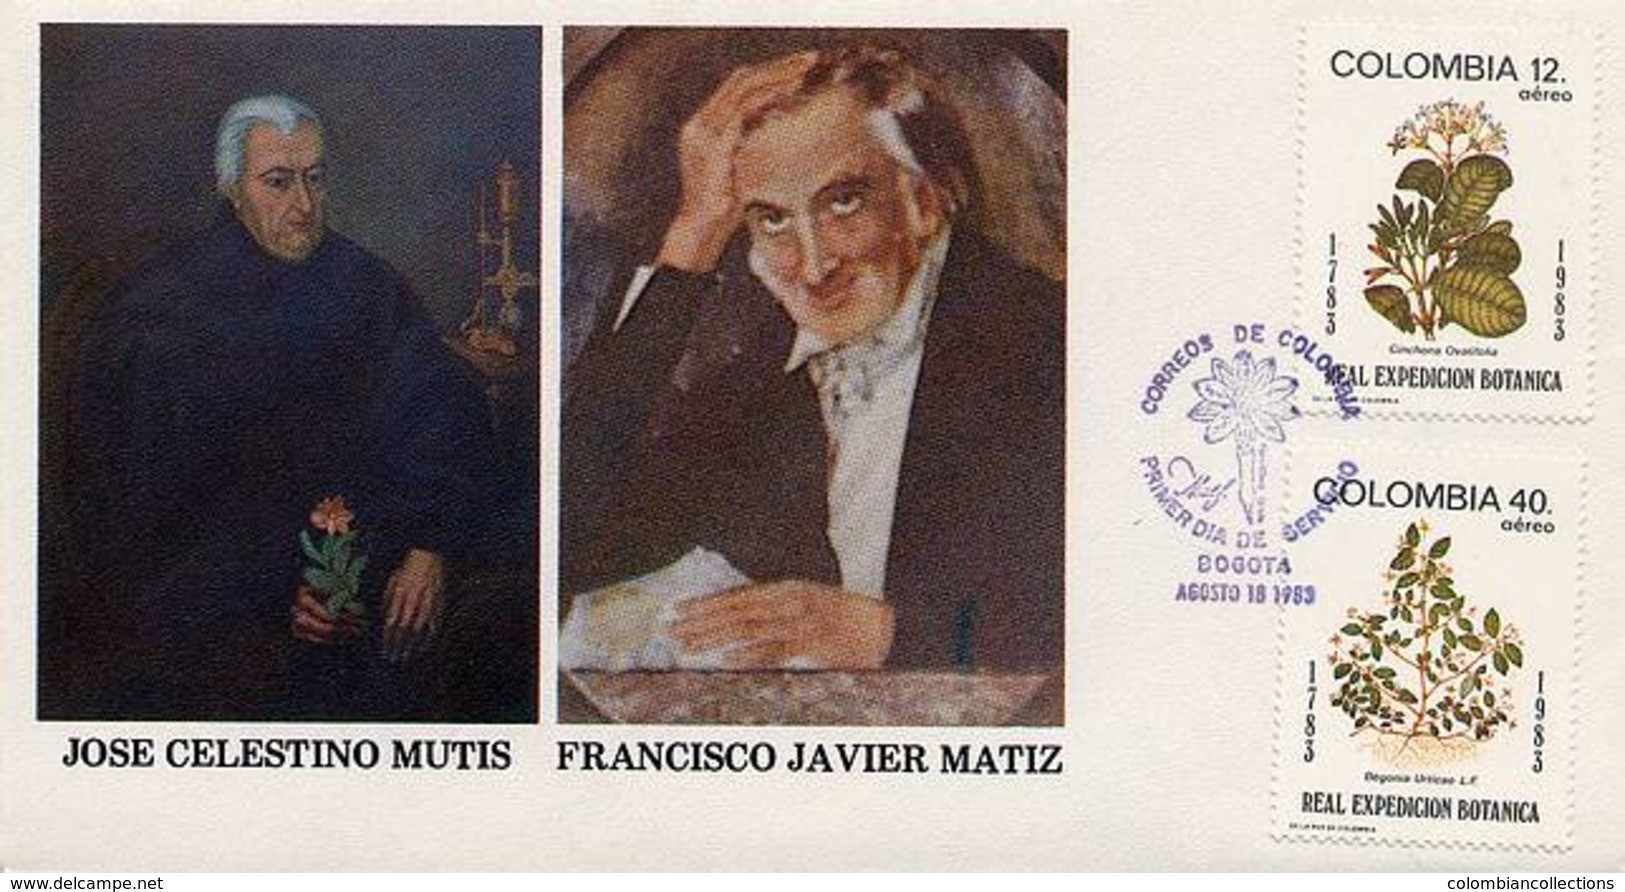 Lote 1642-4F, Colombia,1983, SPD-FDC, 200 Años Expedicion Botanica, Botanical Expedition, Flower, Mutis - Colombie